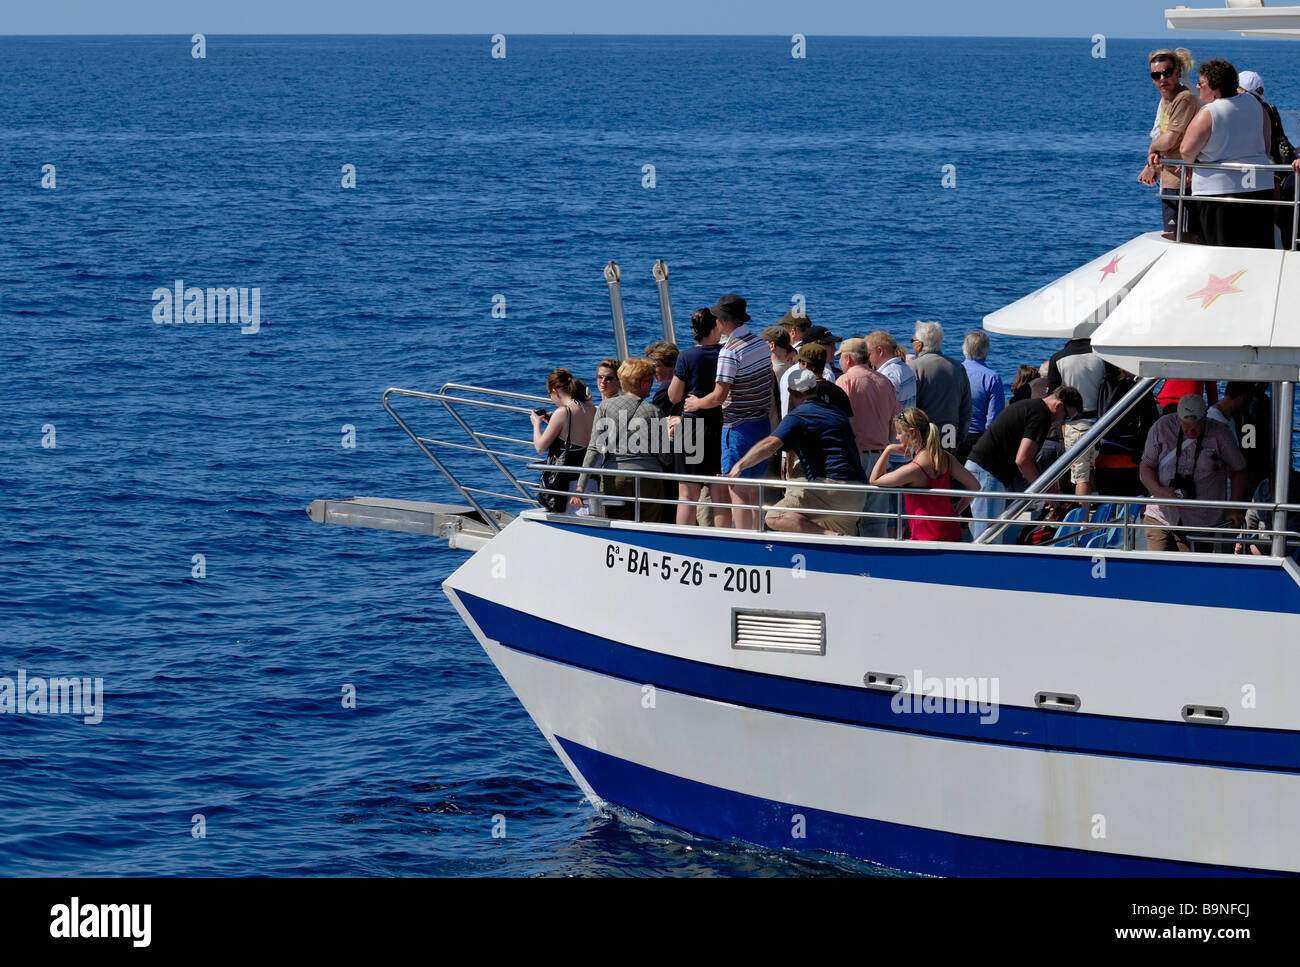 The exciment among the tourists on the dolphin search boat. Puerto Rico, Gran Canaria, Canary Islands, Spain, Europe. Stock Photo